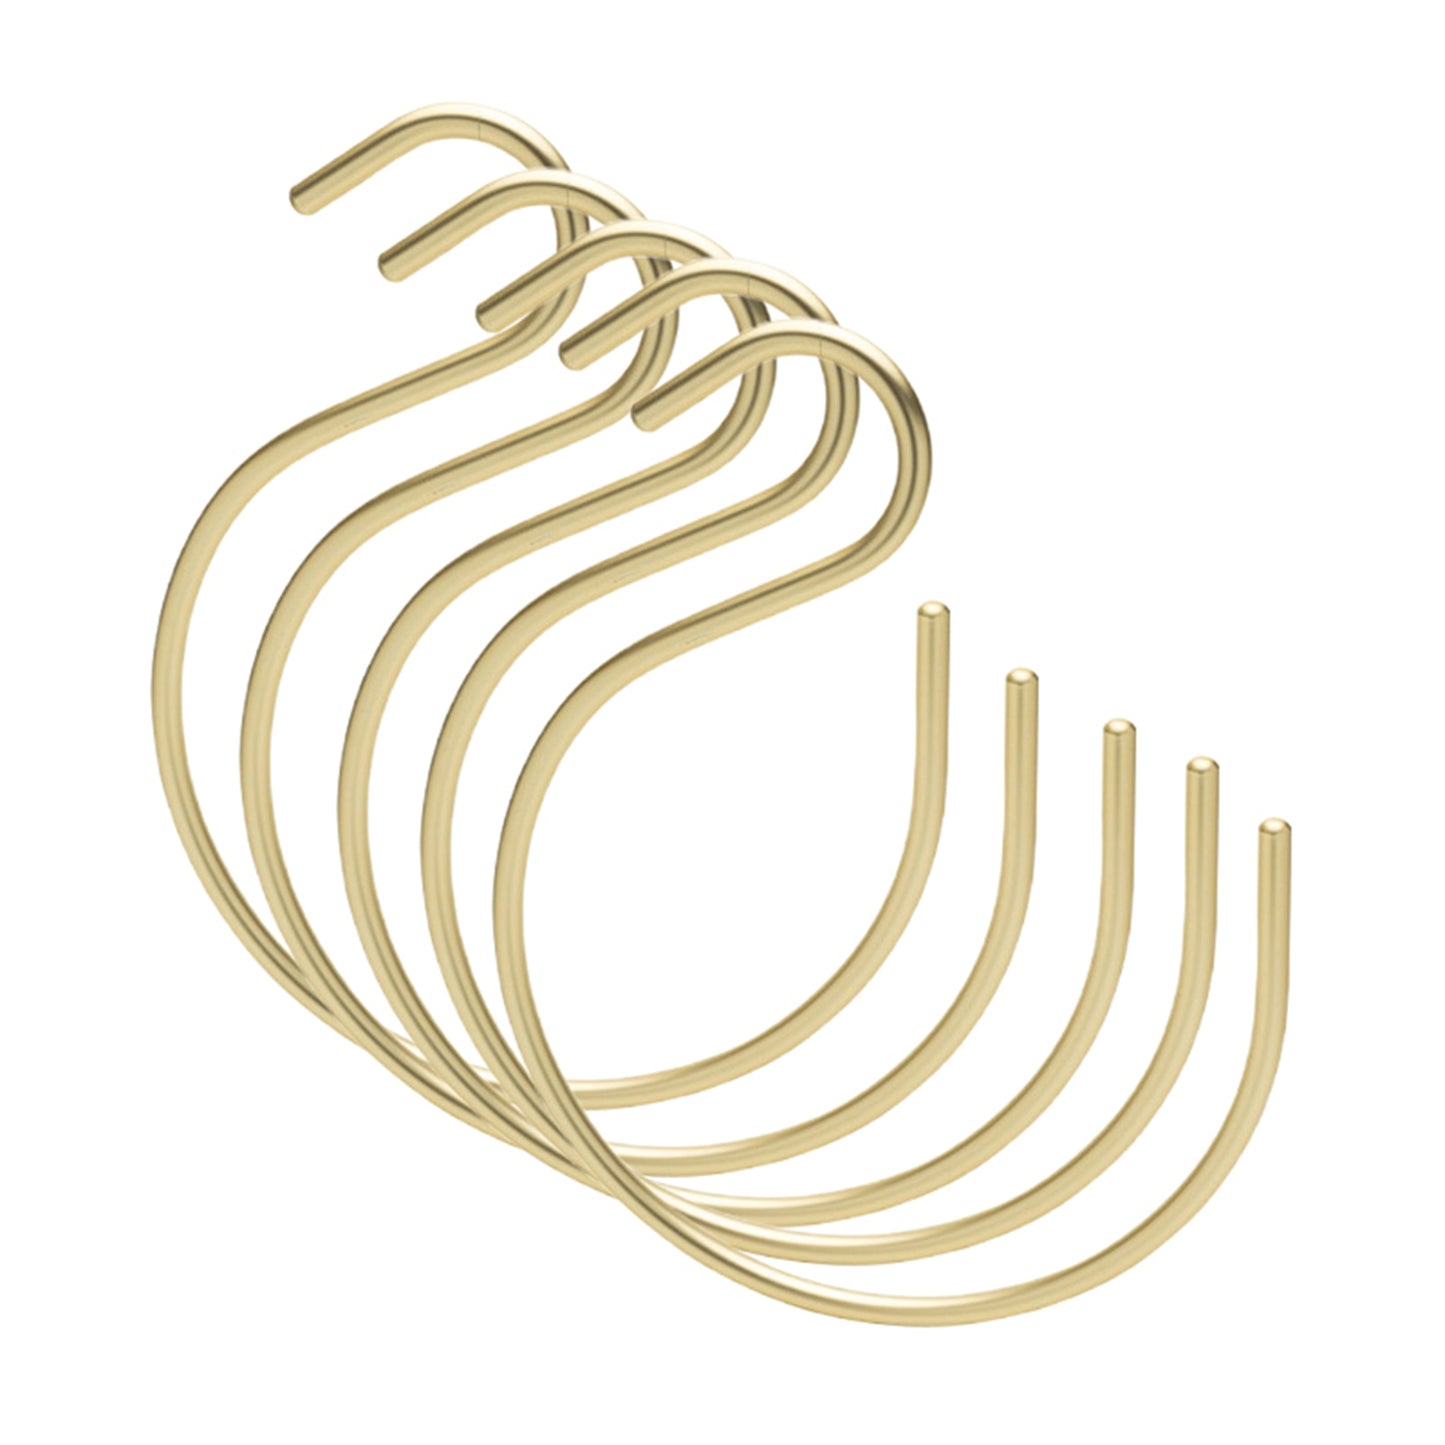 The Goldie Clothing Hook